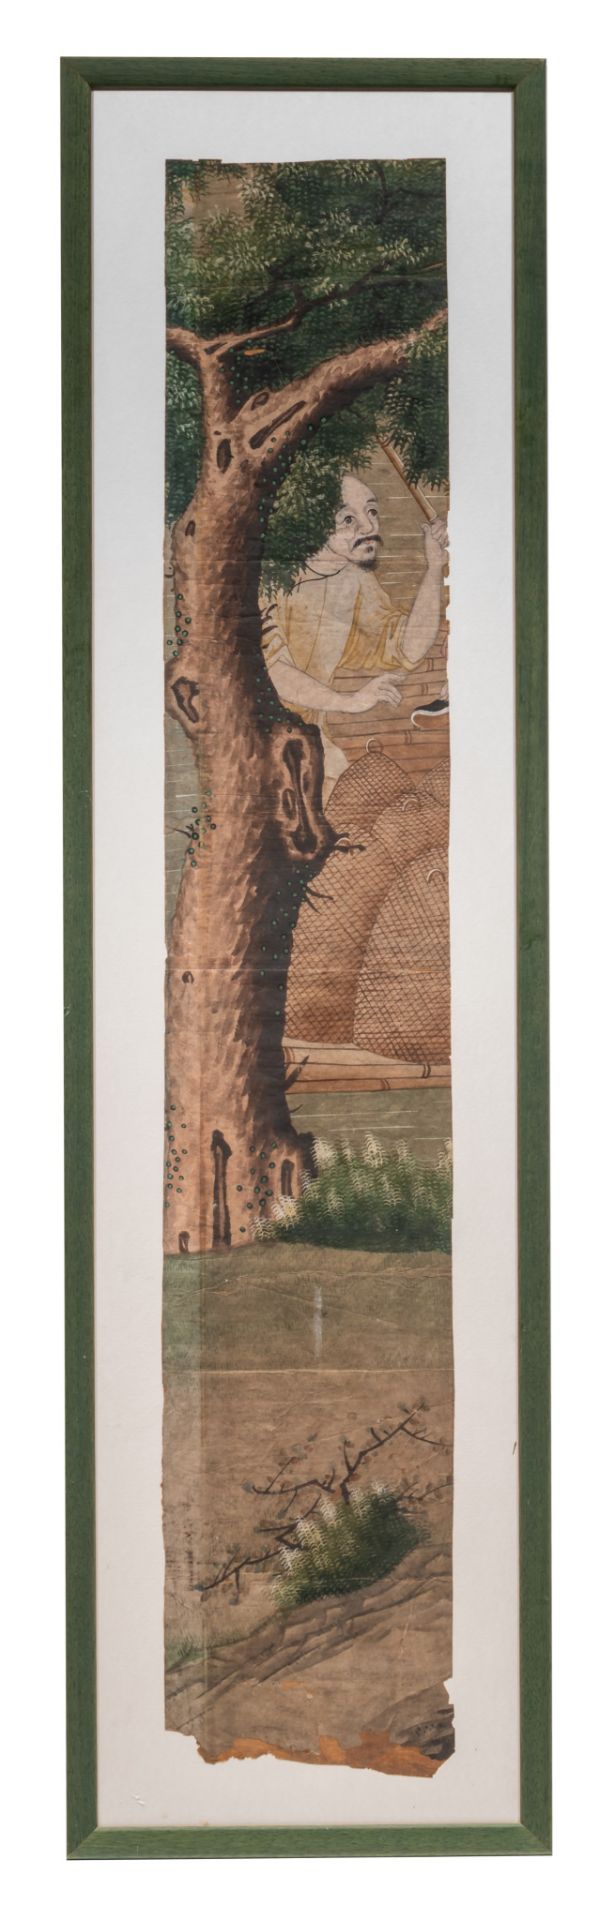 A fragment of a panoramic scene from wallpaper, 18thC, framed 125 x 33,5 cm - Image 2 of 6